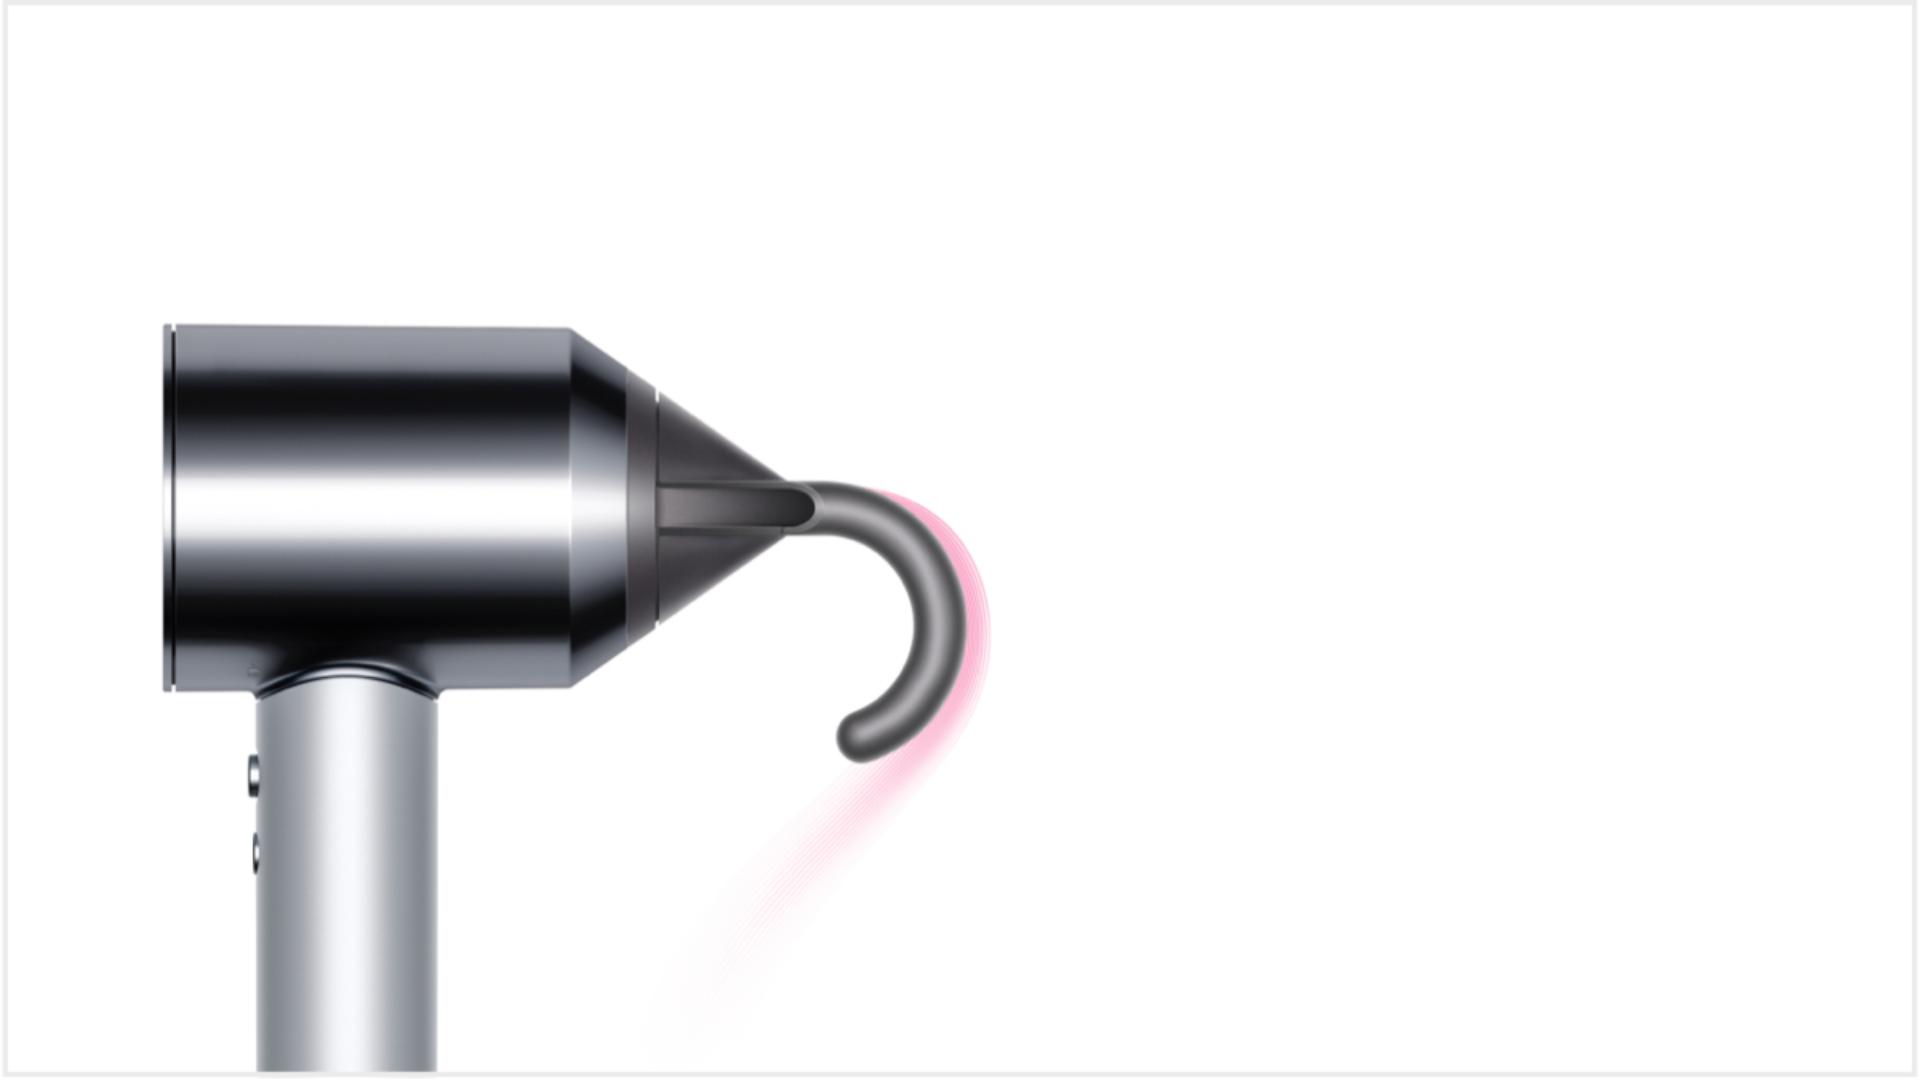 Flyaway attachment on the Dyson Supersonic™ professional hair dryer